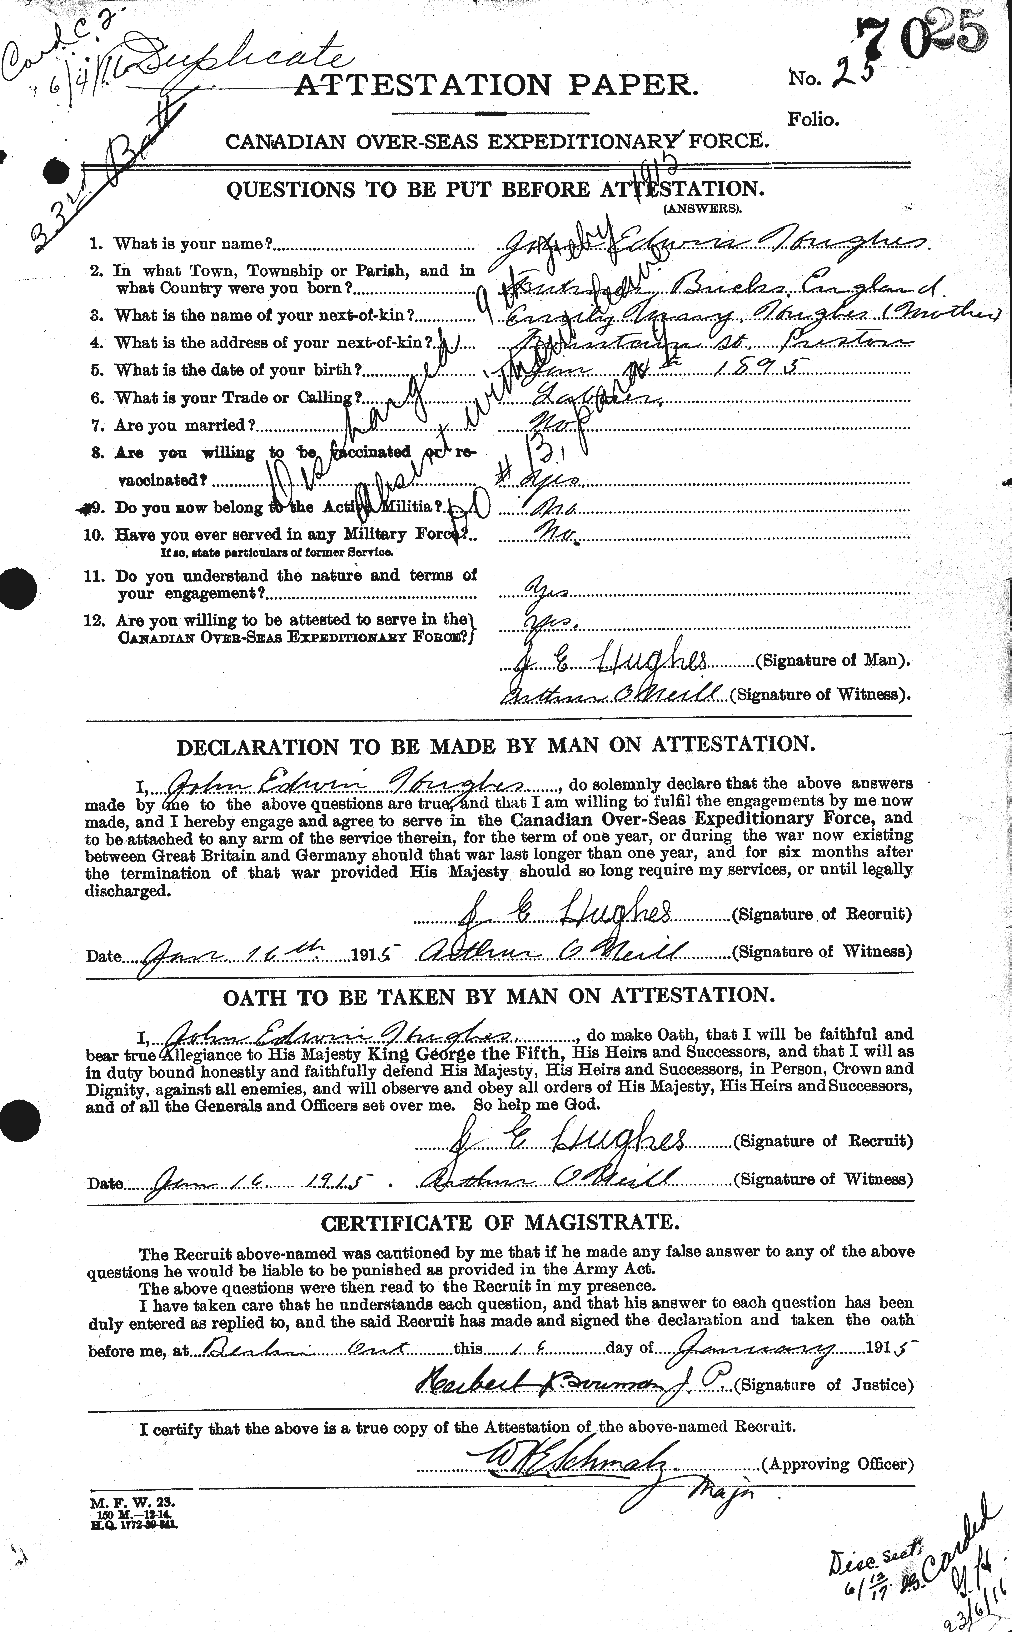 Personnel Records of the First World War - CEF 404014a